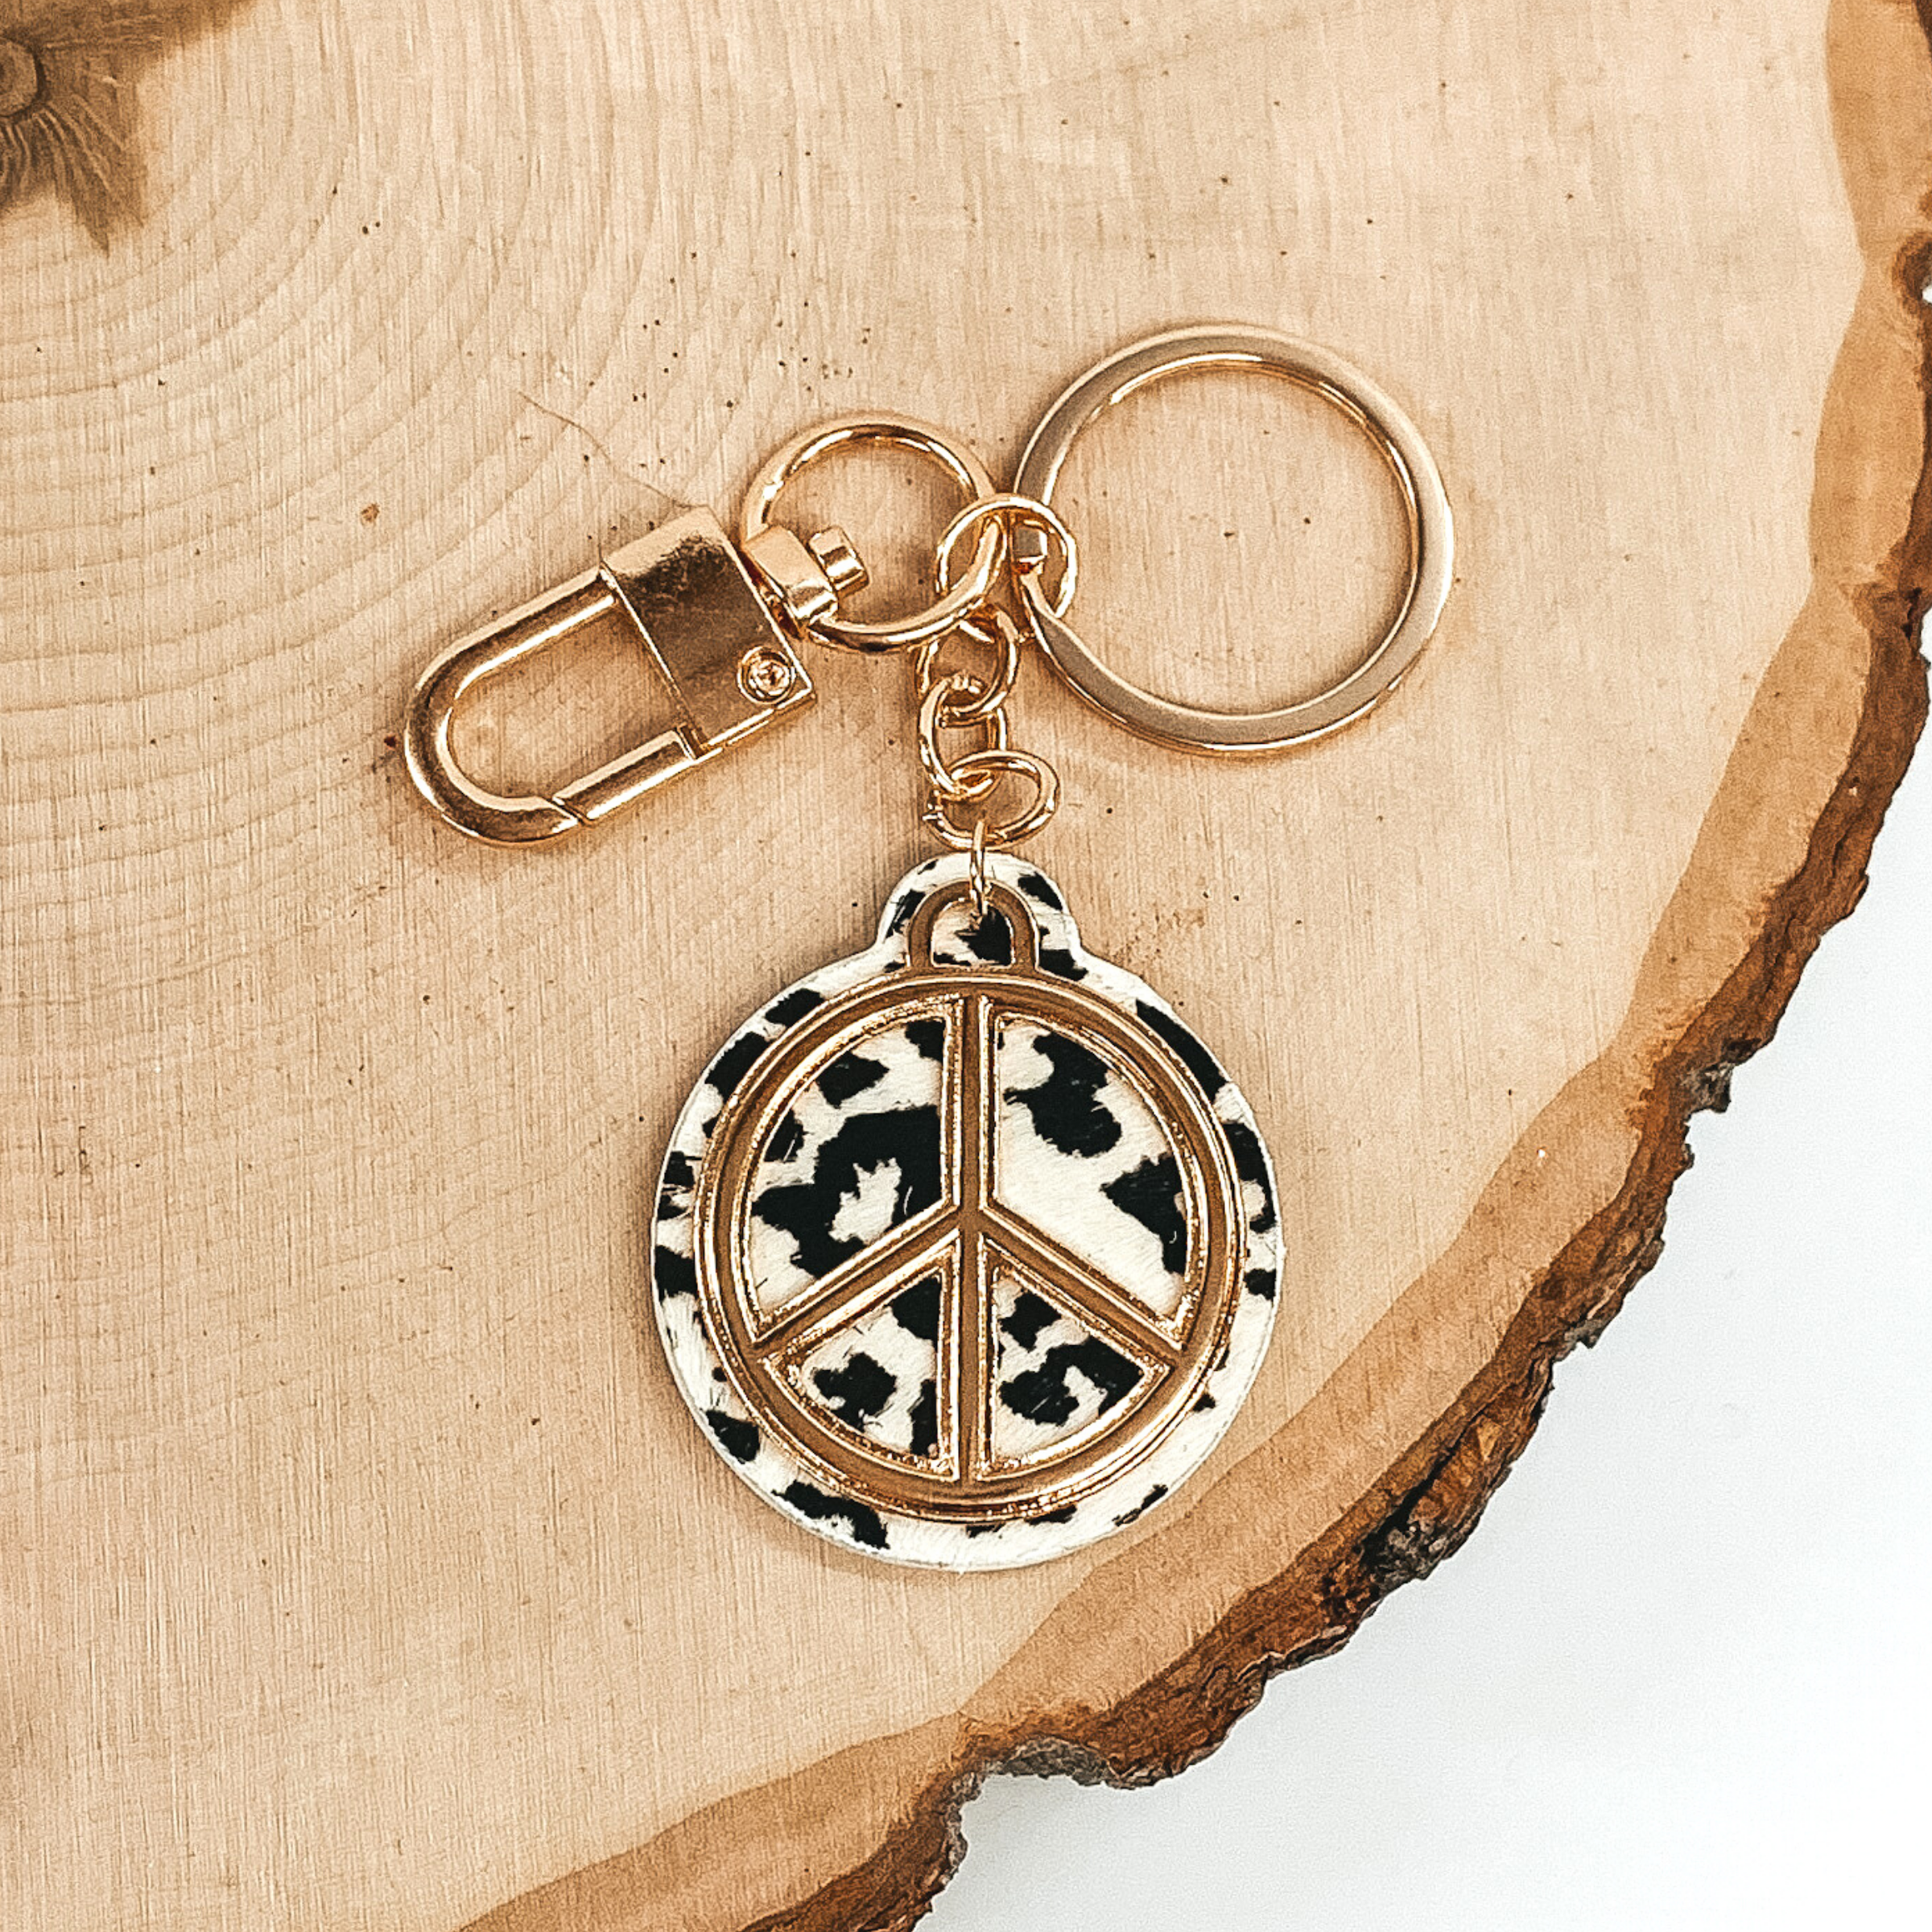 Gold key chain with a white and black leopard print circle pendant that includes a gold peace sign outline. This key chain is pictured on a piece of wood on a white background.